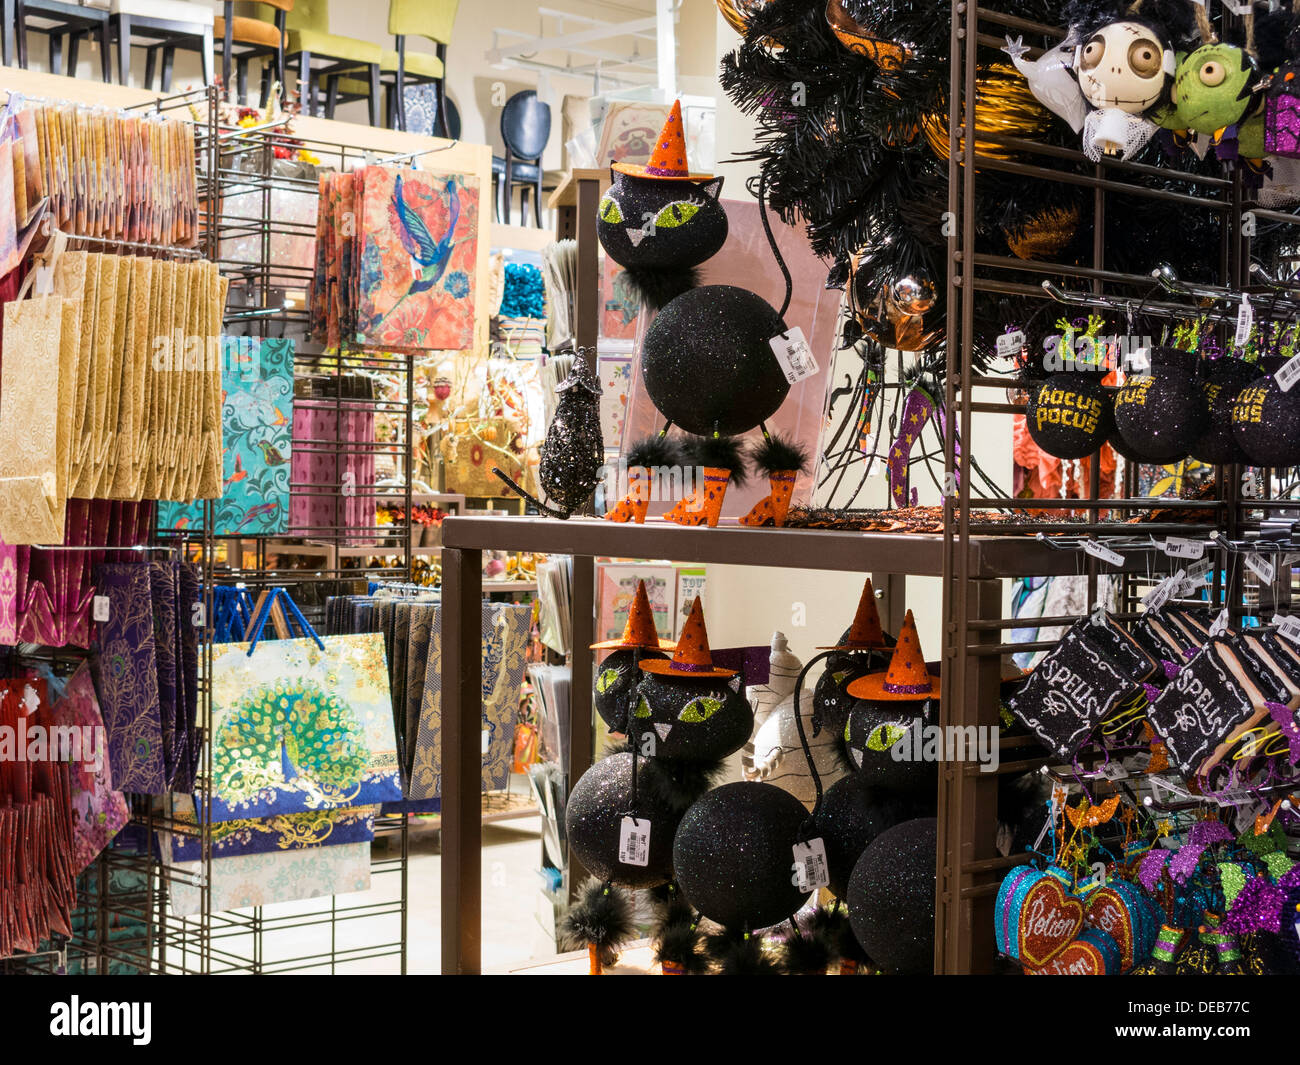 Halloween Display in Pier 1 Imports, NYC Stock Photo - Alamy